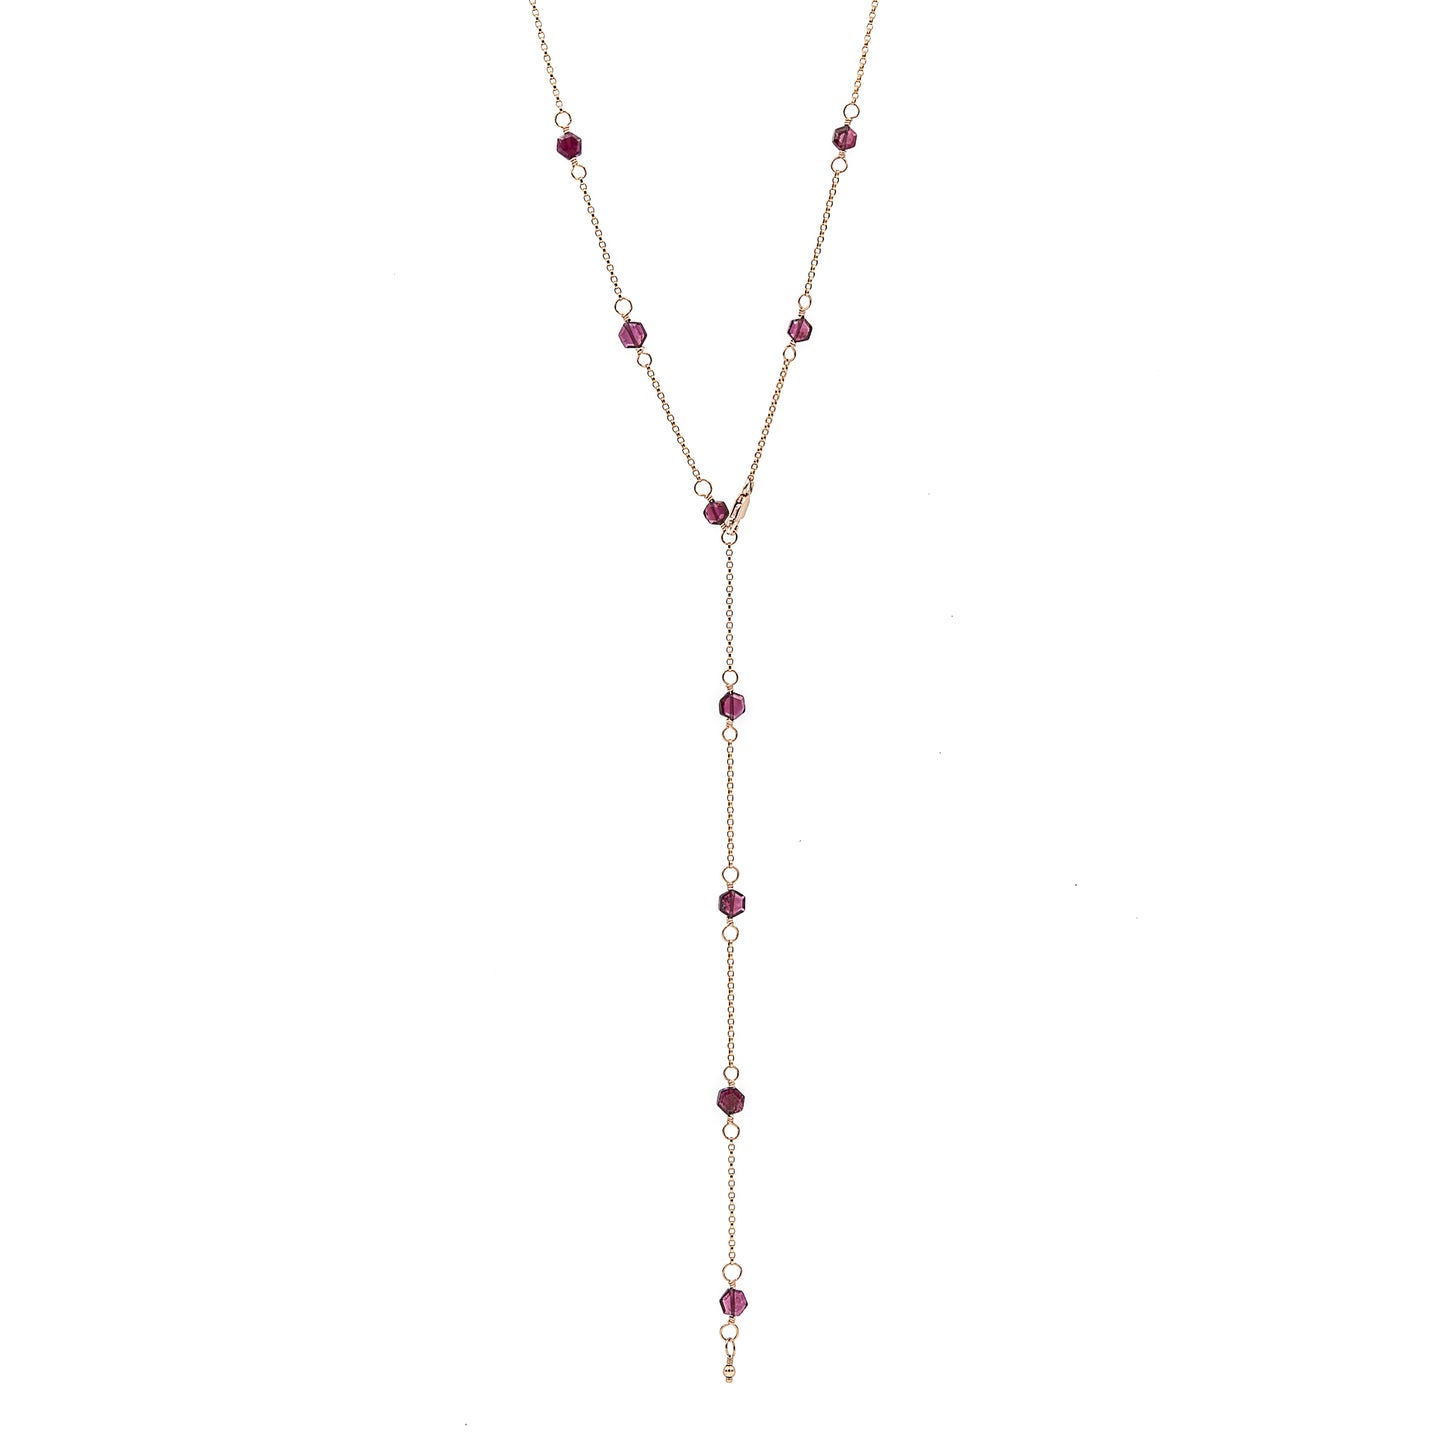 Zurina Ketola Handmade Beaded Gemstone Necklace Featuring Upcycled Garnet Hexagon Beads with 14K Gold Fill Details.